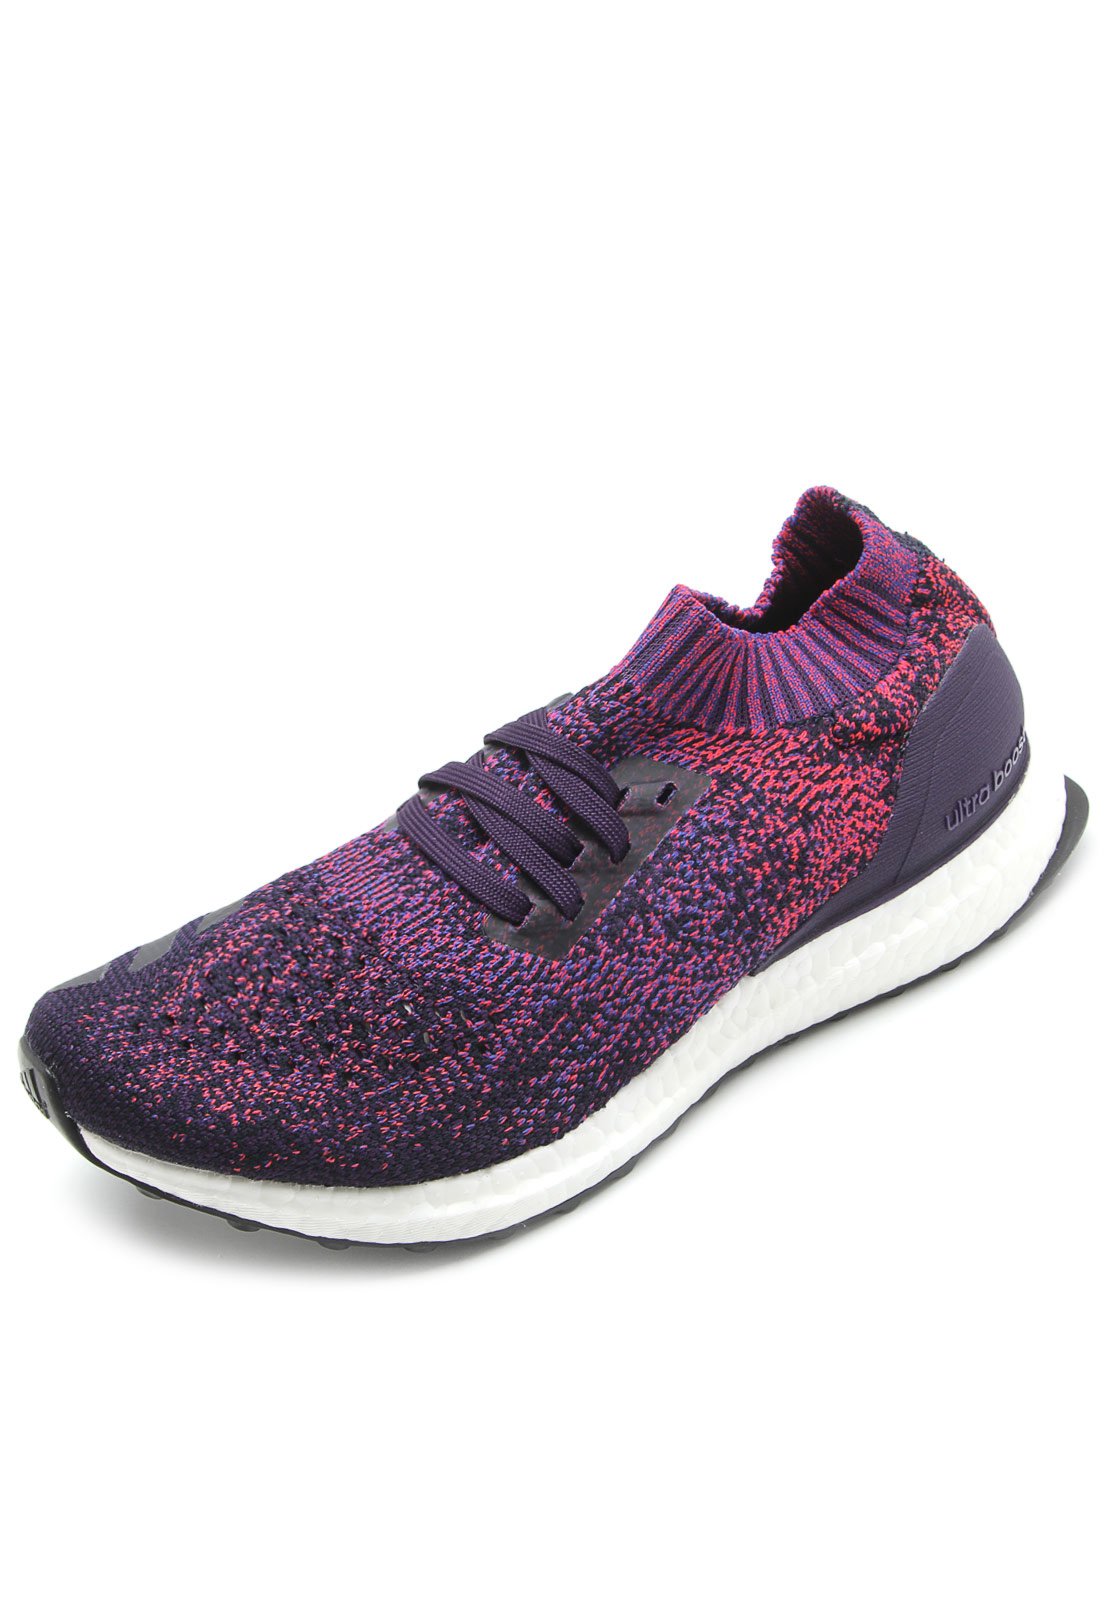 tenis adidas ultra boost uncaged